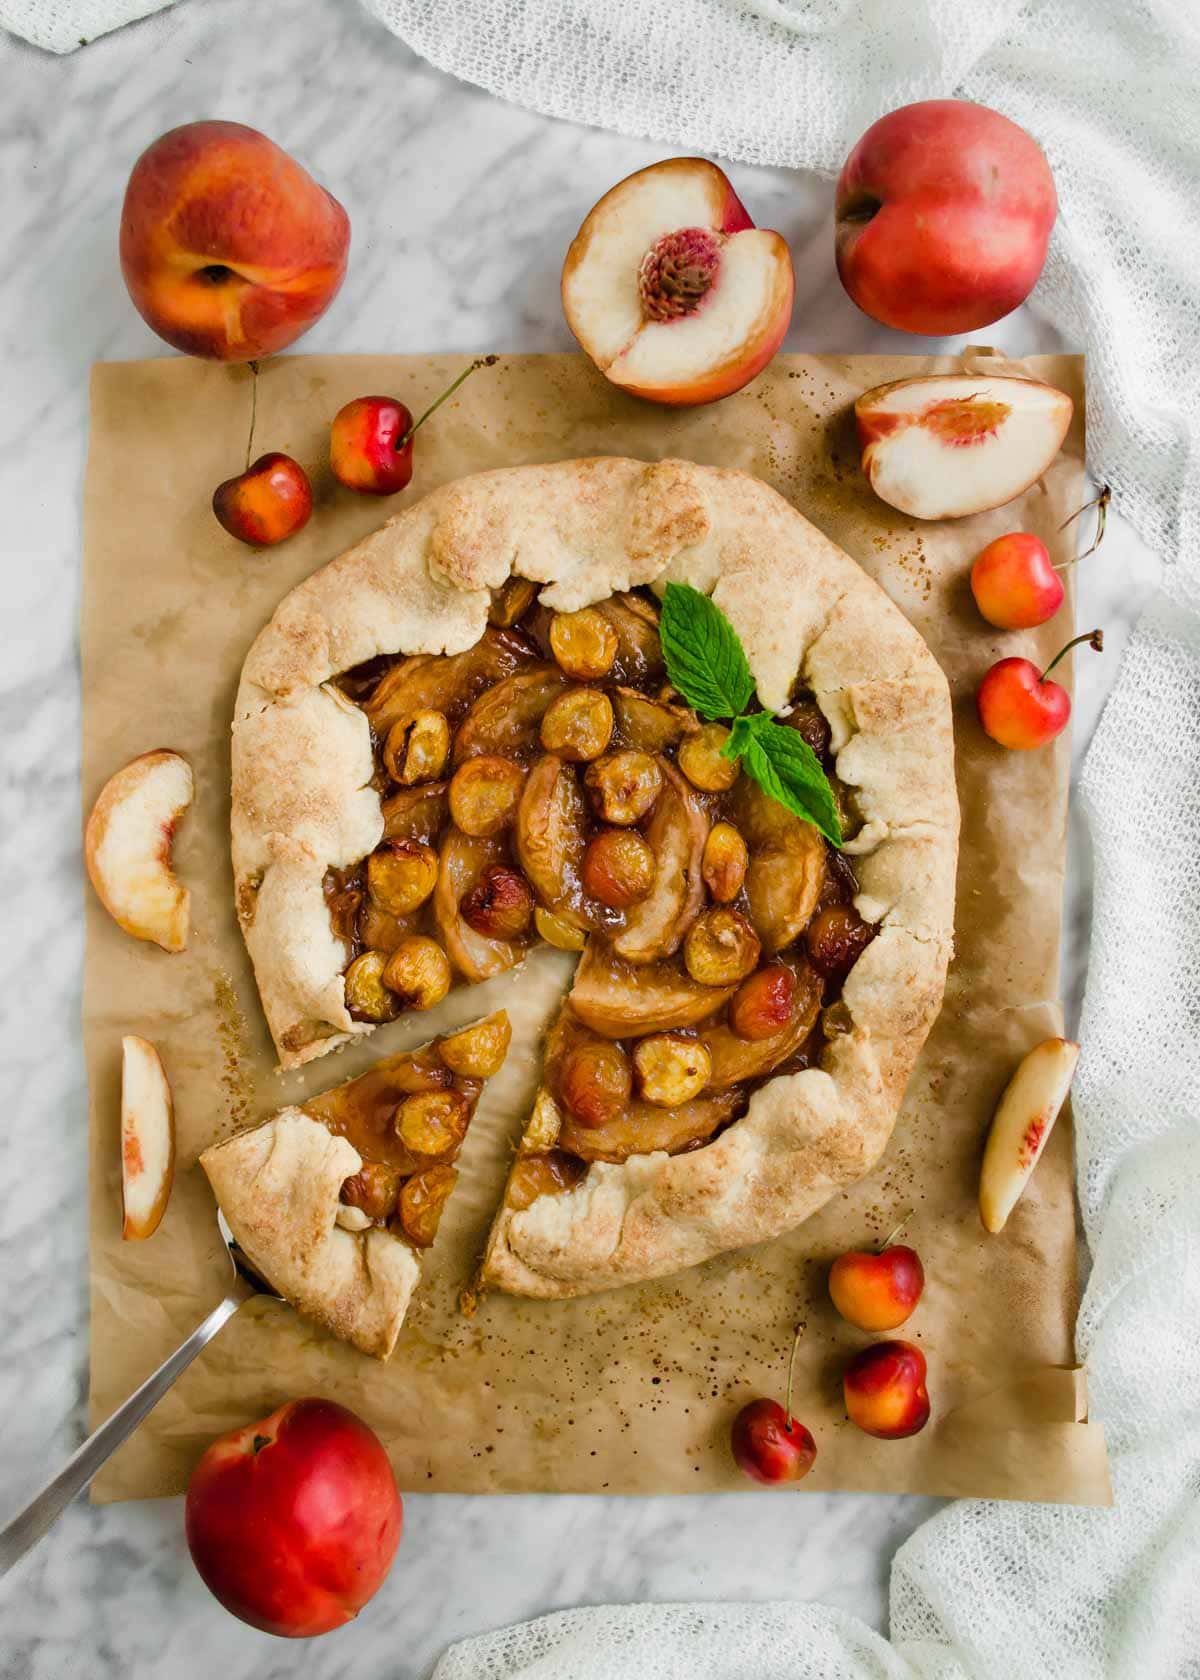 White Peach and Cherry Galette on parchment paper with sliced peaches and cherries flatlay.